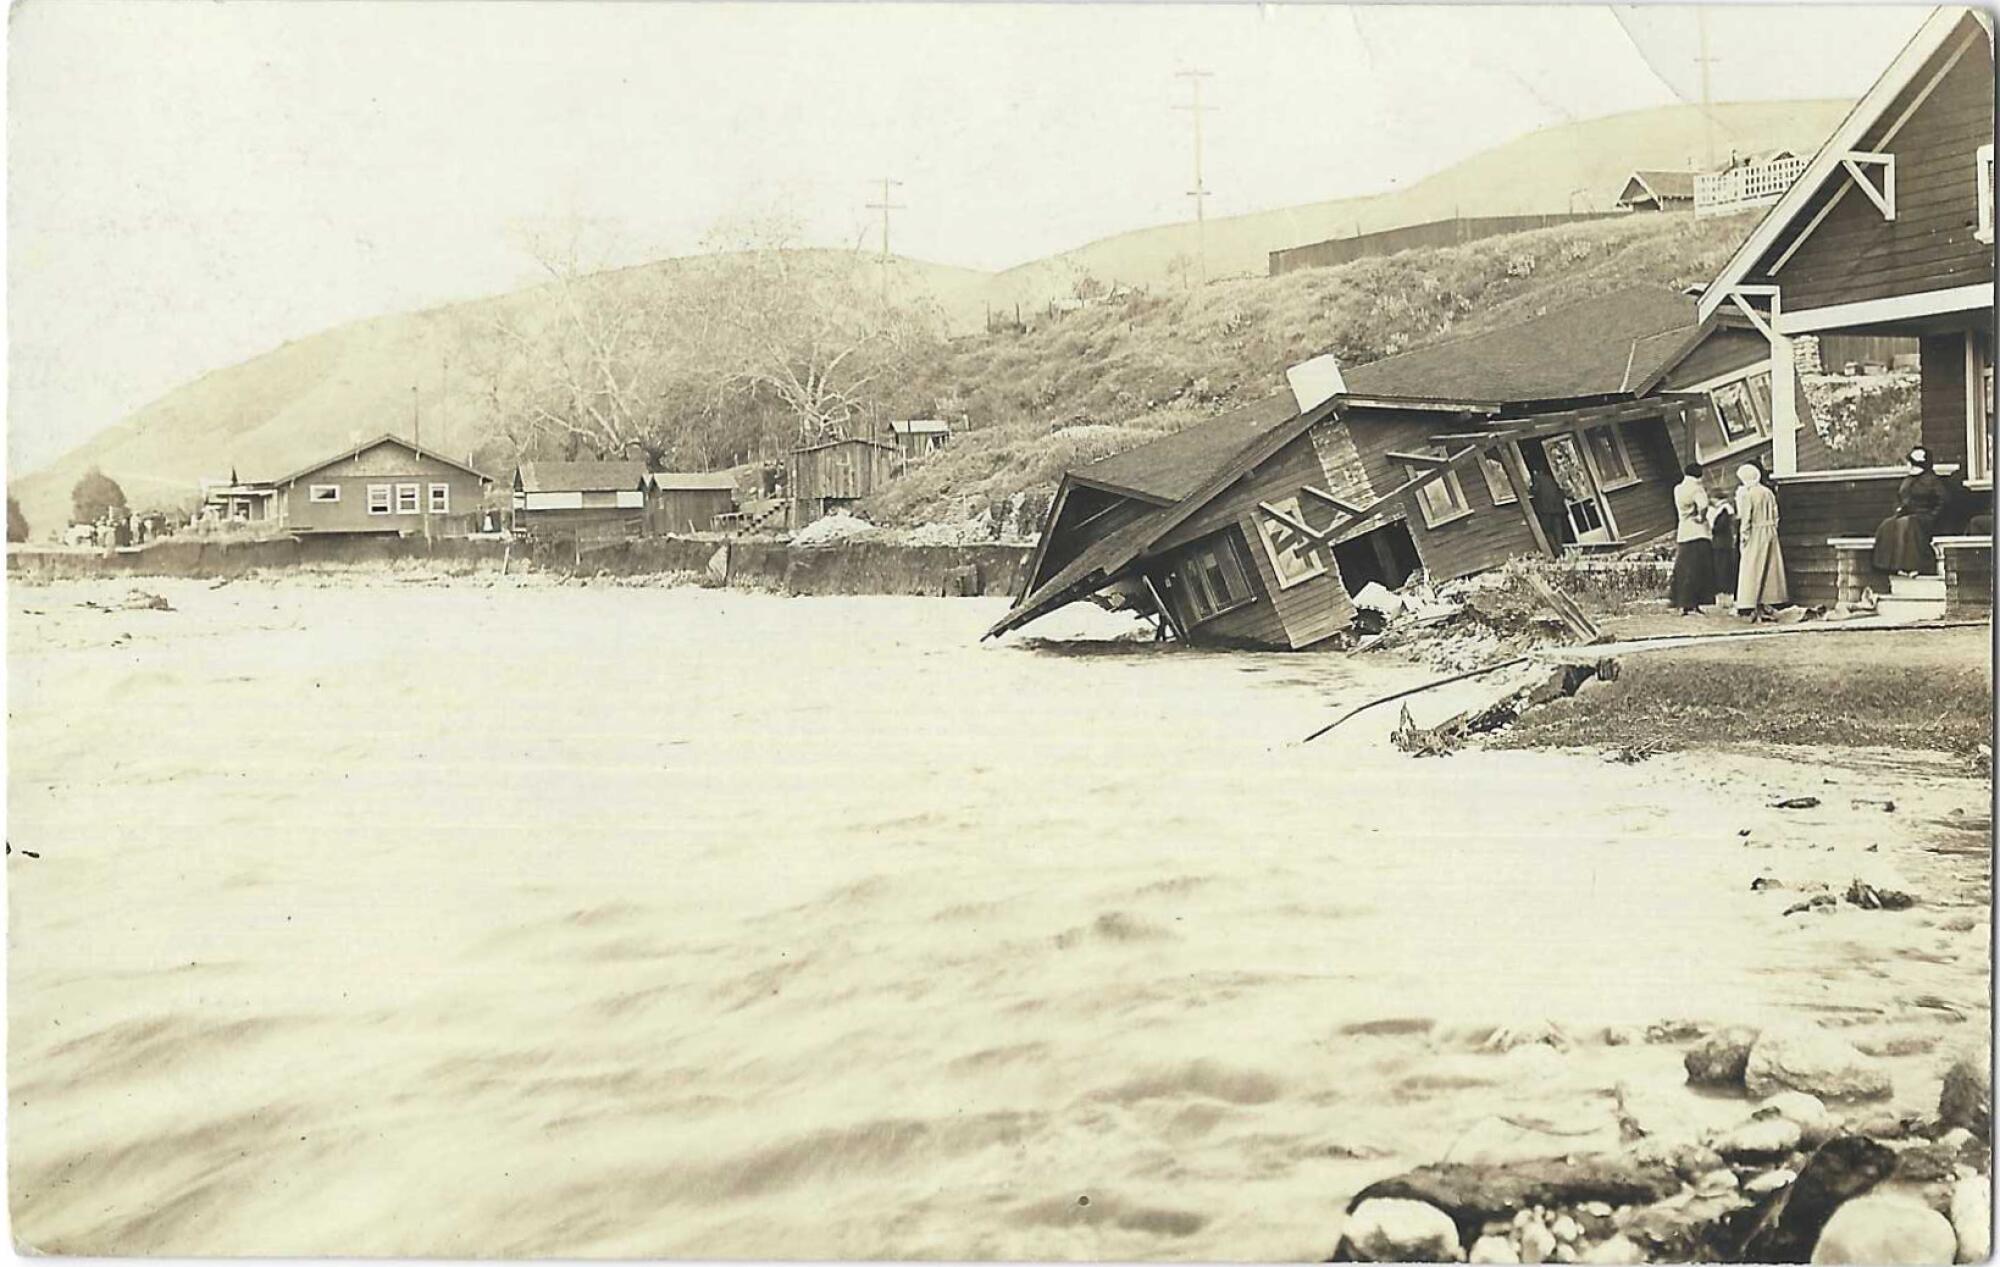 Floodwaters and damaged home. On the back of the card, someone wrote: "The Flood. Sycamore Park, Highland Park, April 1913."